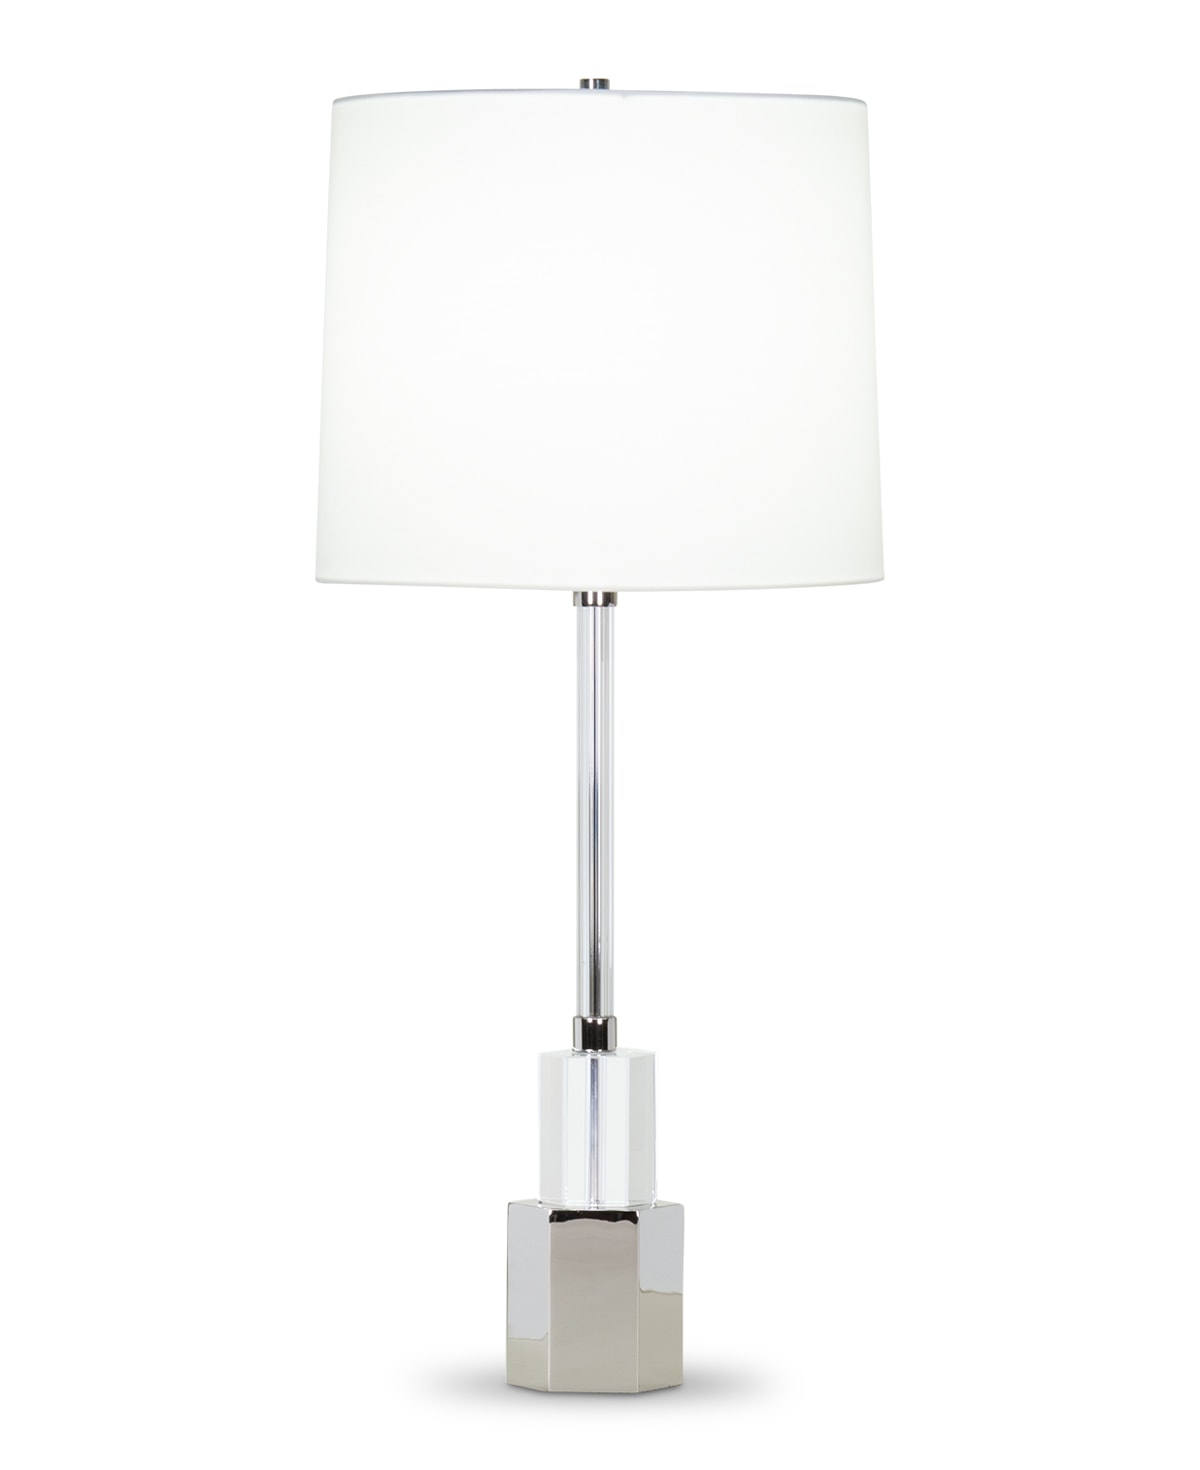 FlowDecor Breton Table Lamp in crystal and metal with polished nickel finish and off-white cotton tapered drum shade (# 4409)